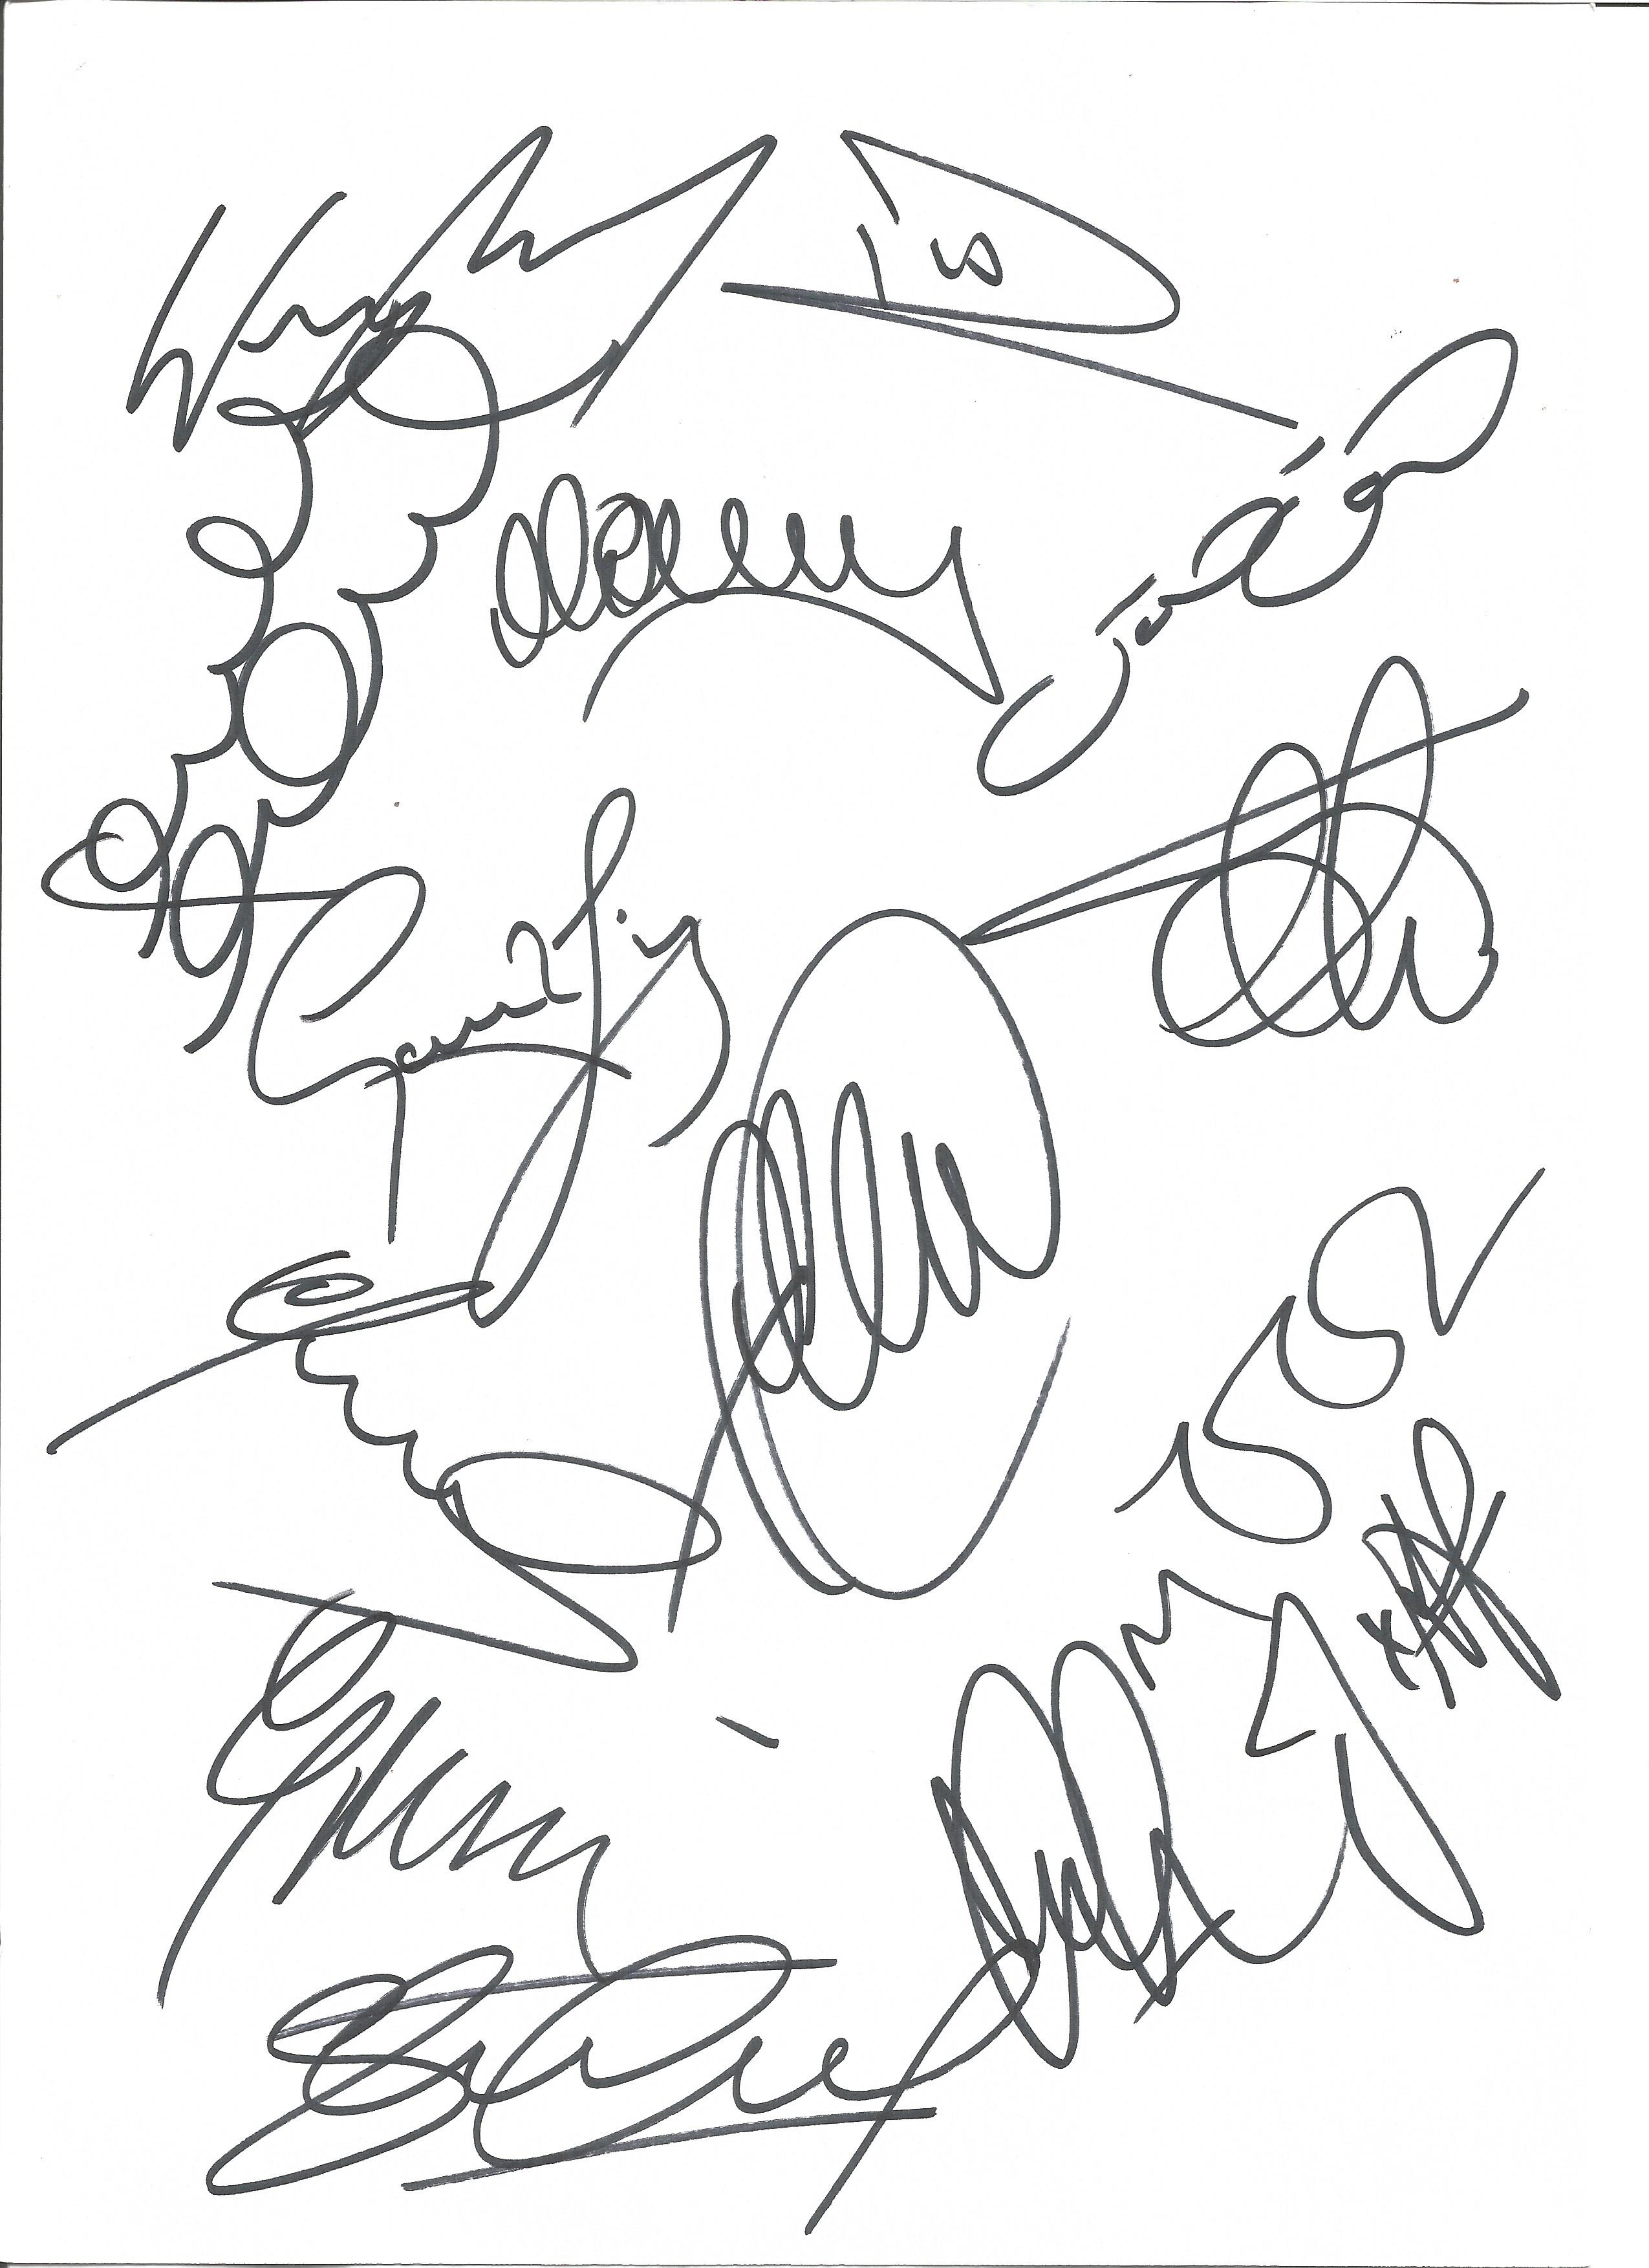 Multi signed A4 white card by England football. Signed by Hargreaves, Gerrard, Lennon, Hart,